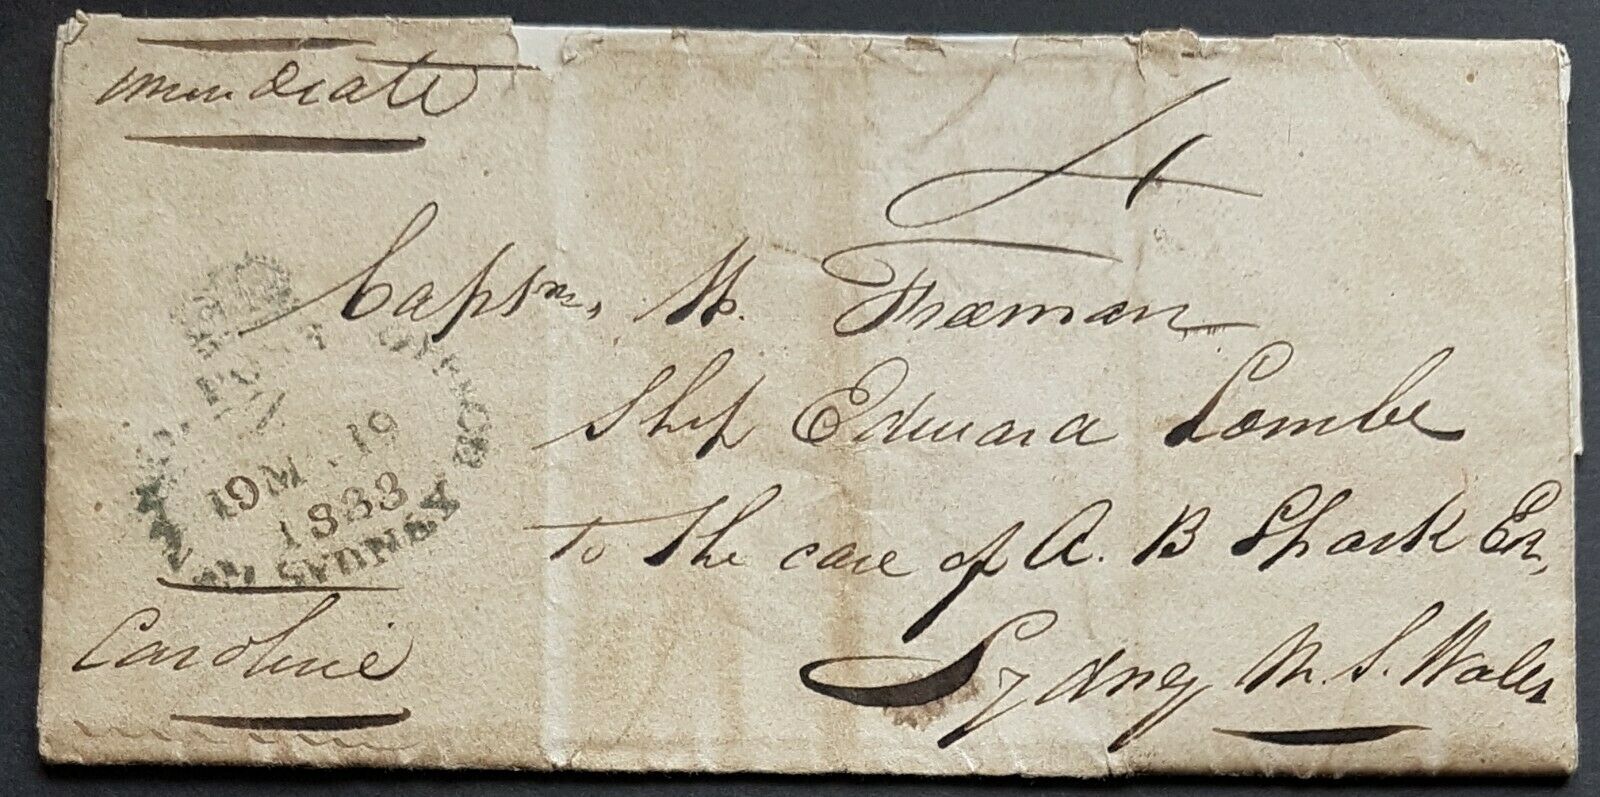 GB - NSW Pre stamp 22 Oct 1832, arrived Sydney 19 March 1833.